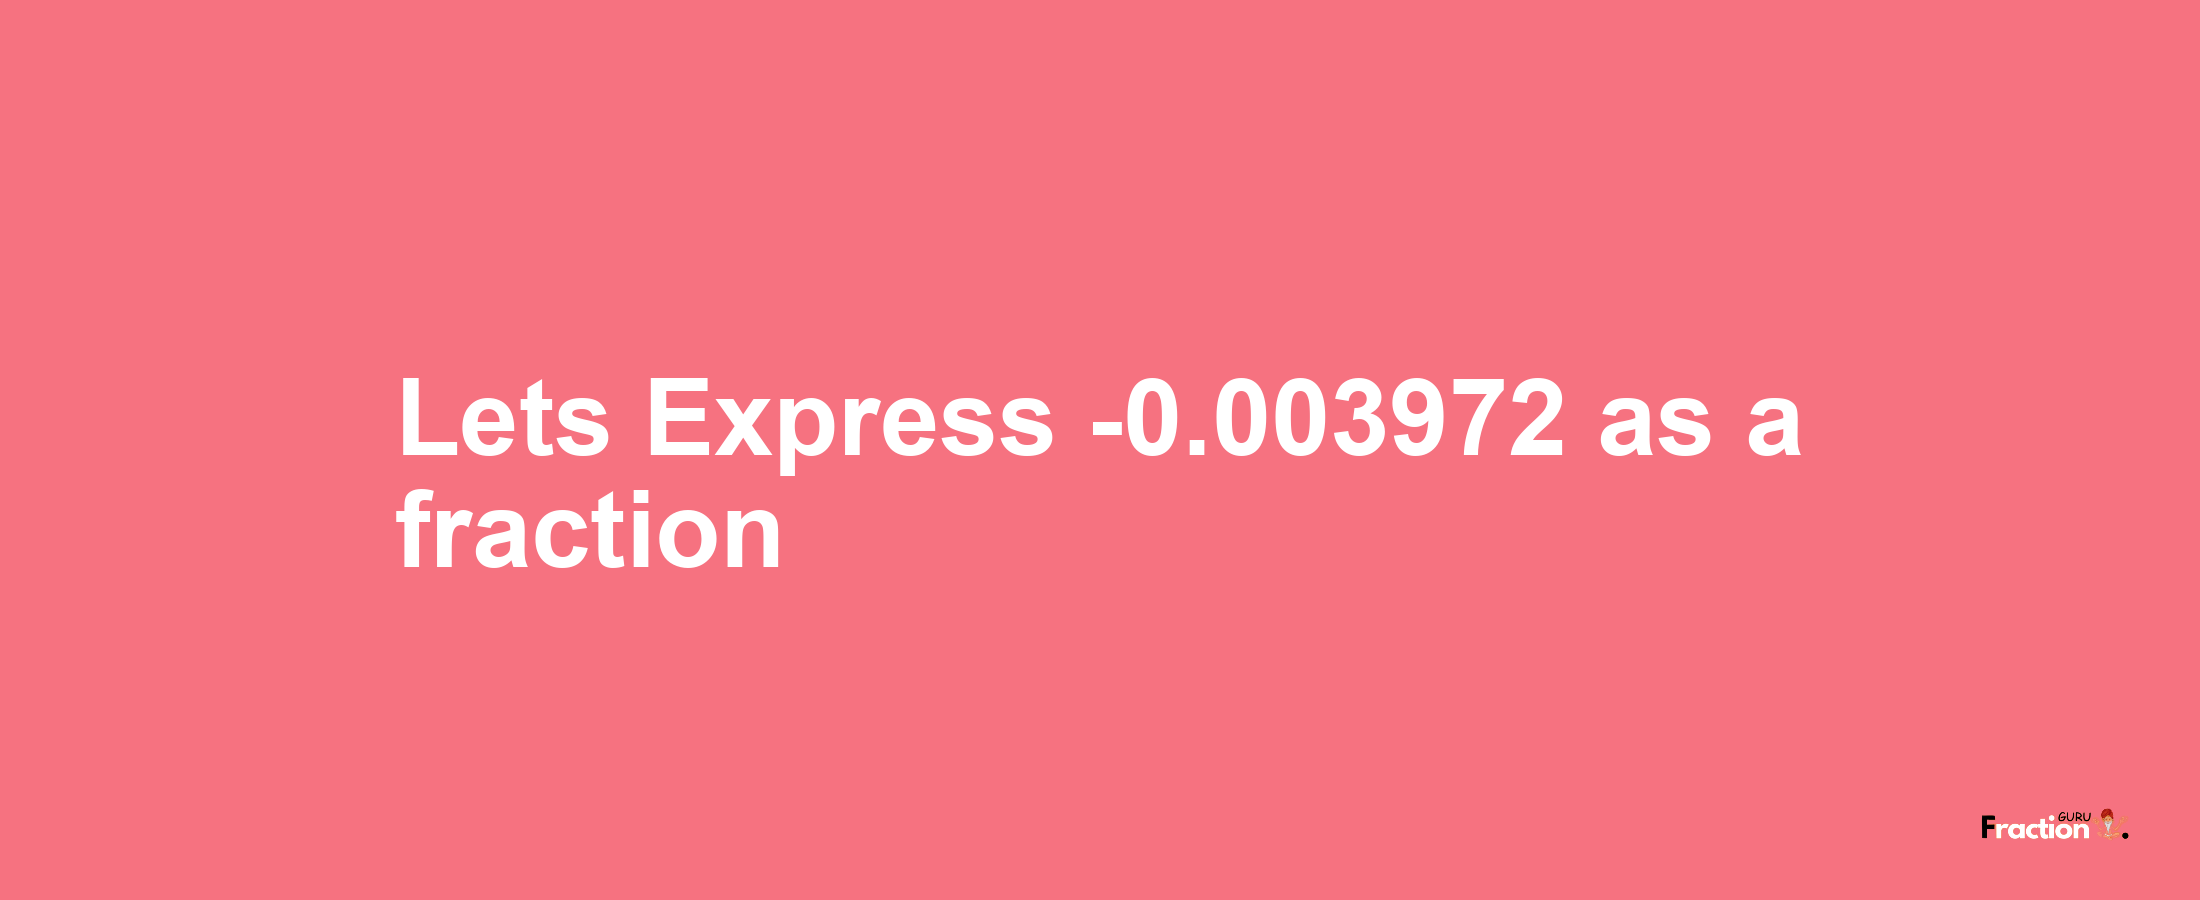 Lets Express -0.003972 as afraction